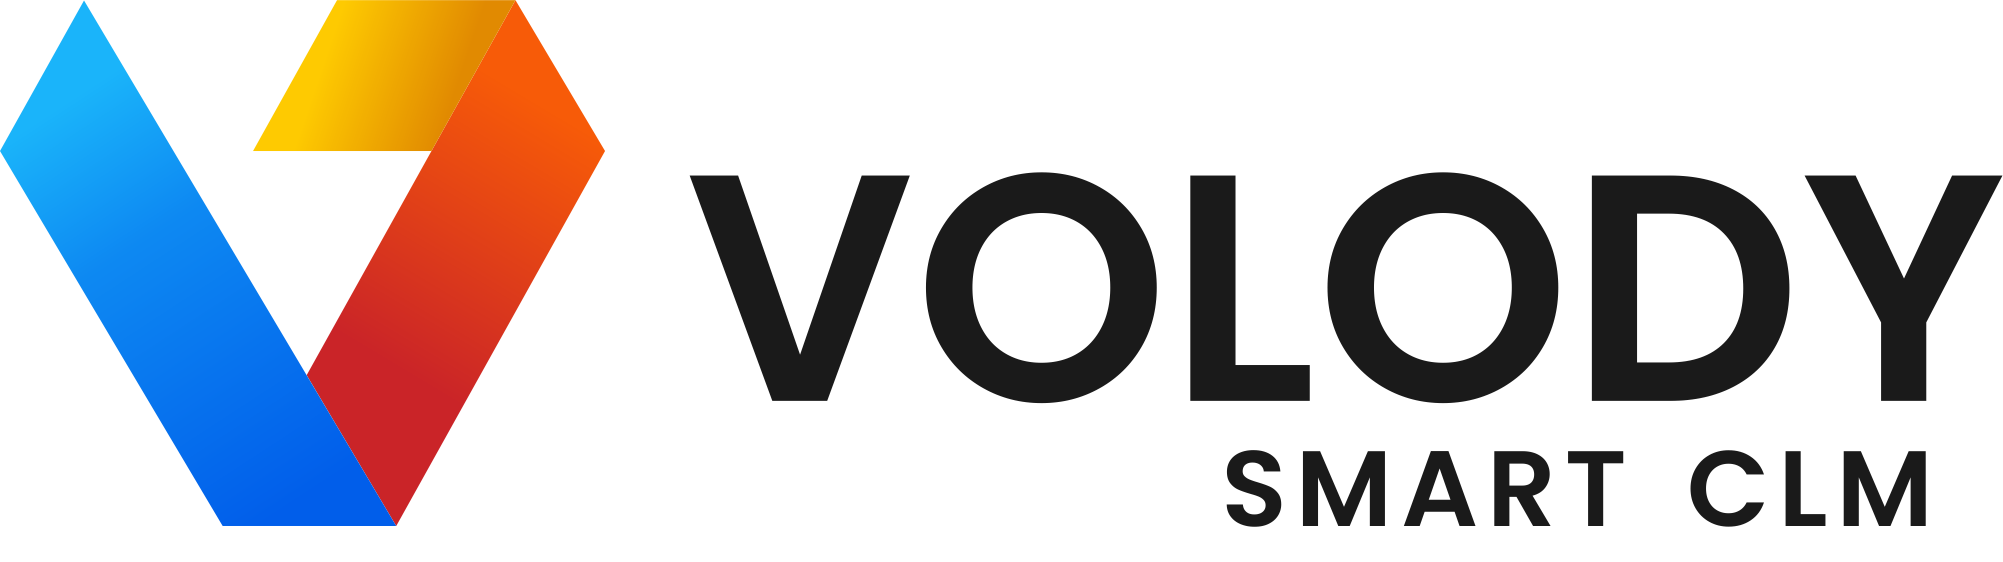 Volody's AI CLM software